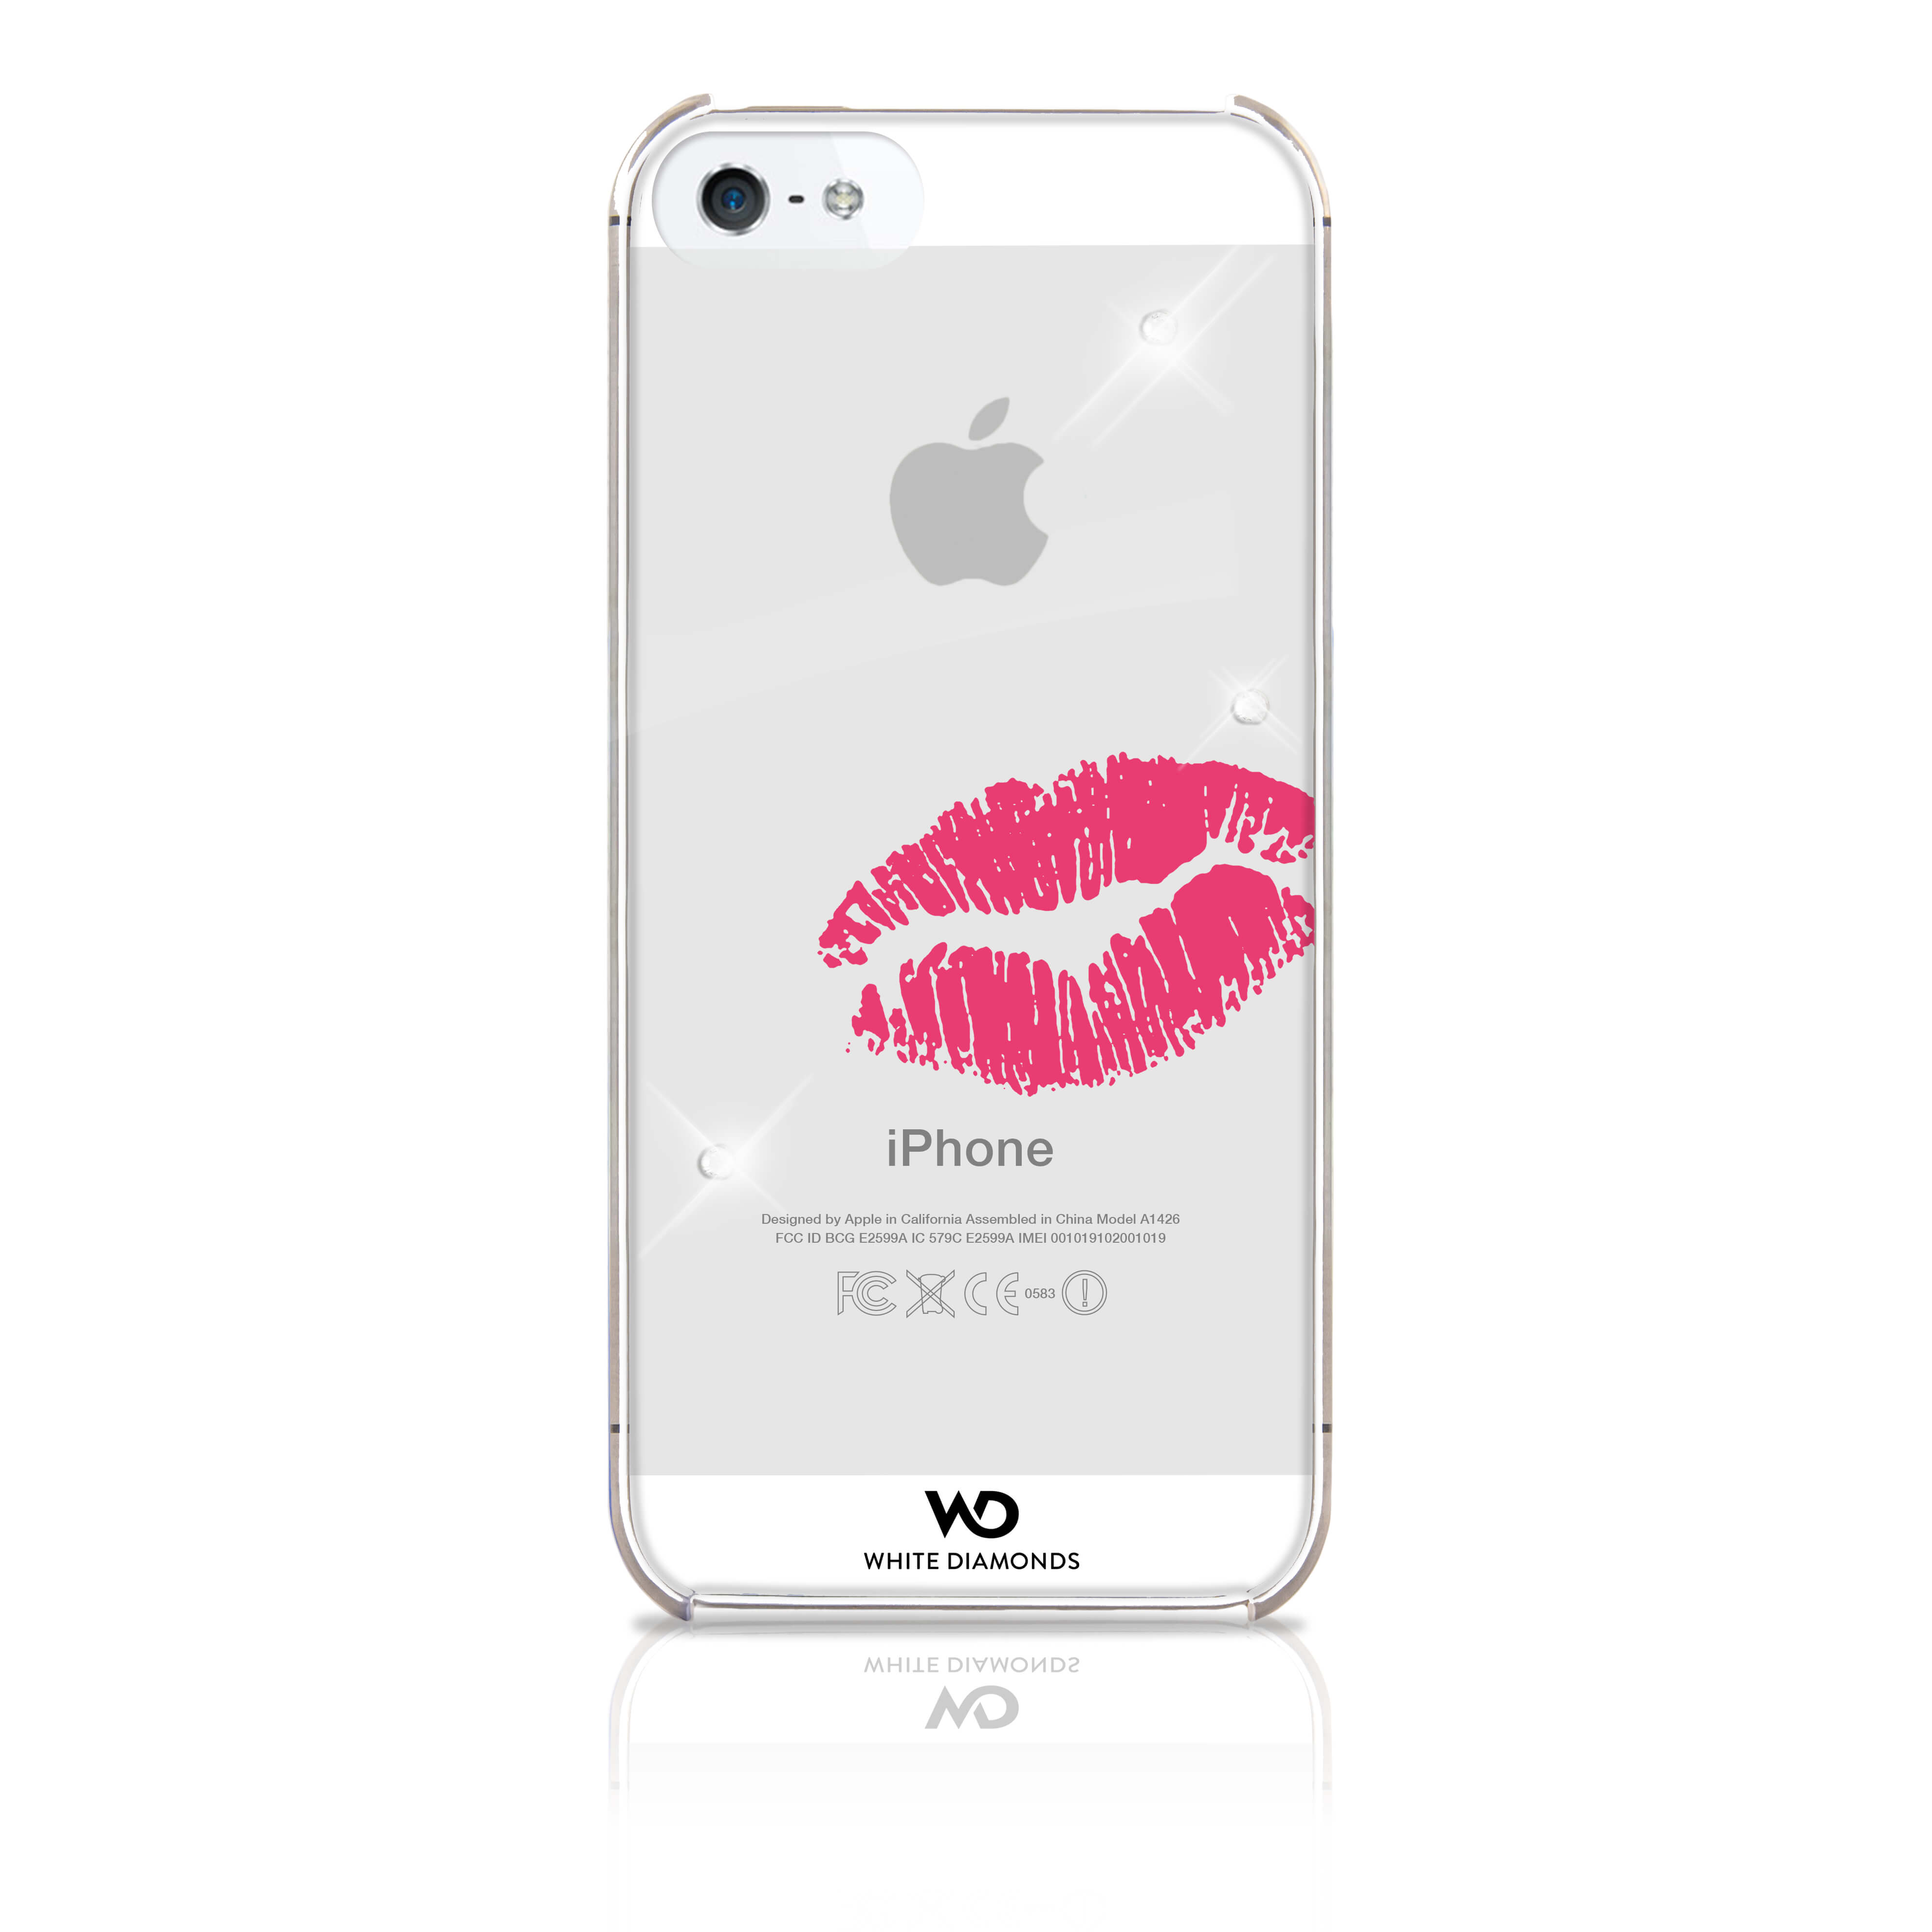 Lipstick Kiss Mobile Phone Co ver for Apple iPhone 5, red